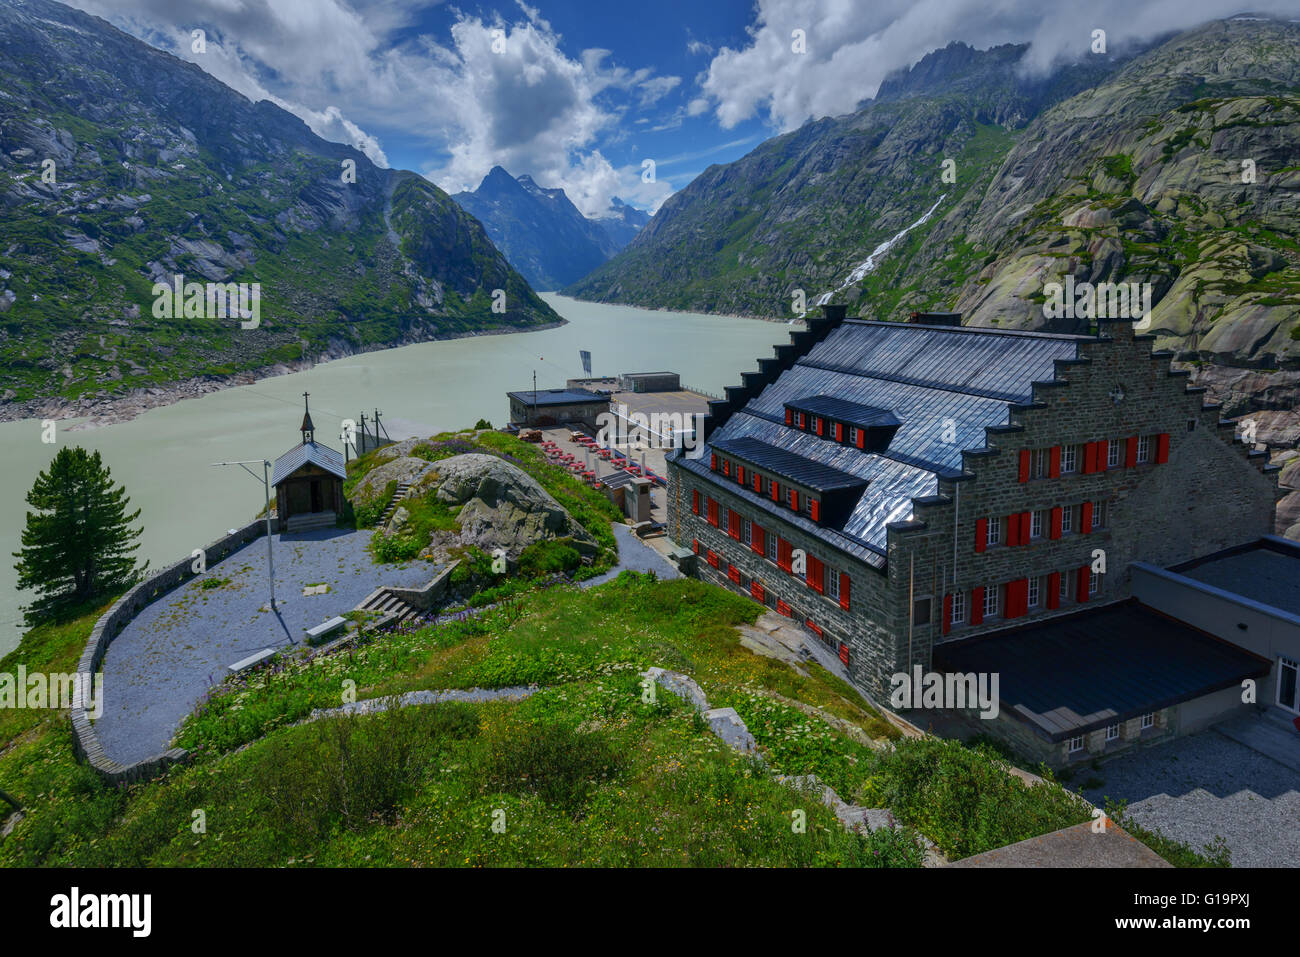 Great view from the top of the Grimsel pass over the Grimselsee hotel and dam. Switzerland, Bernese Alps, Europe. Stock Photo